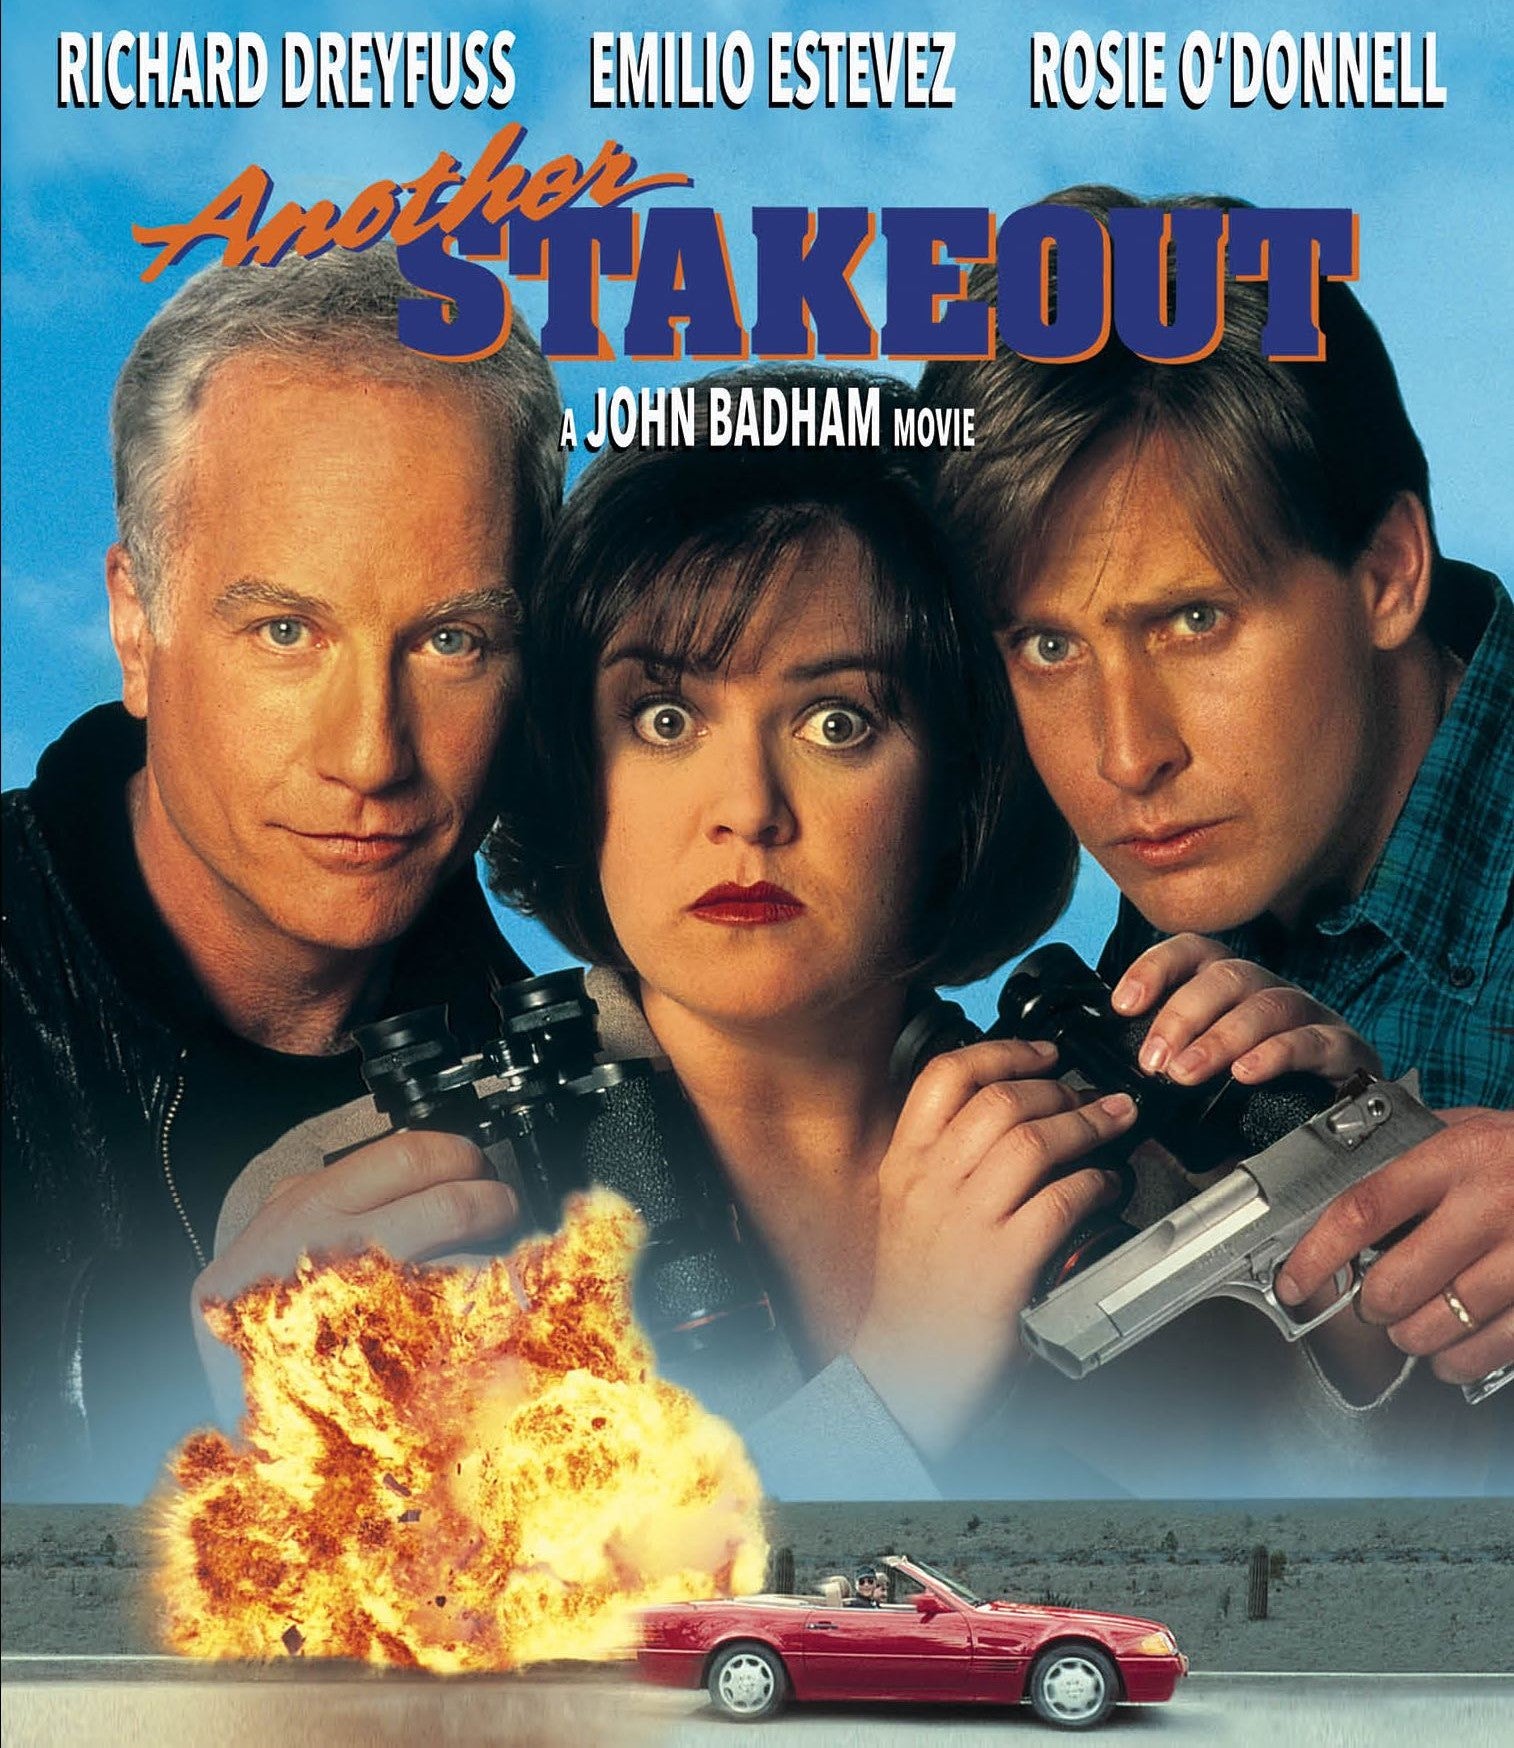 ANOTHER STAKEOUT BLU-RAY